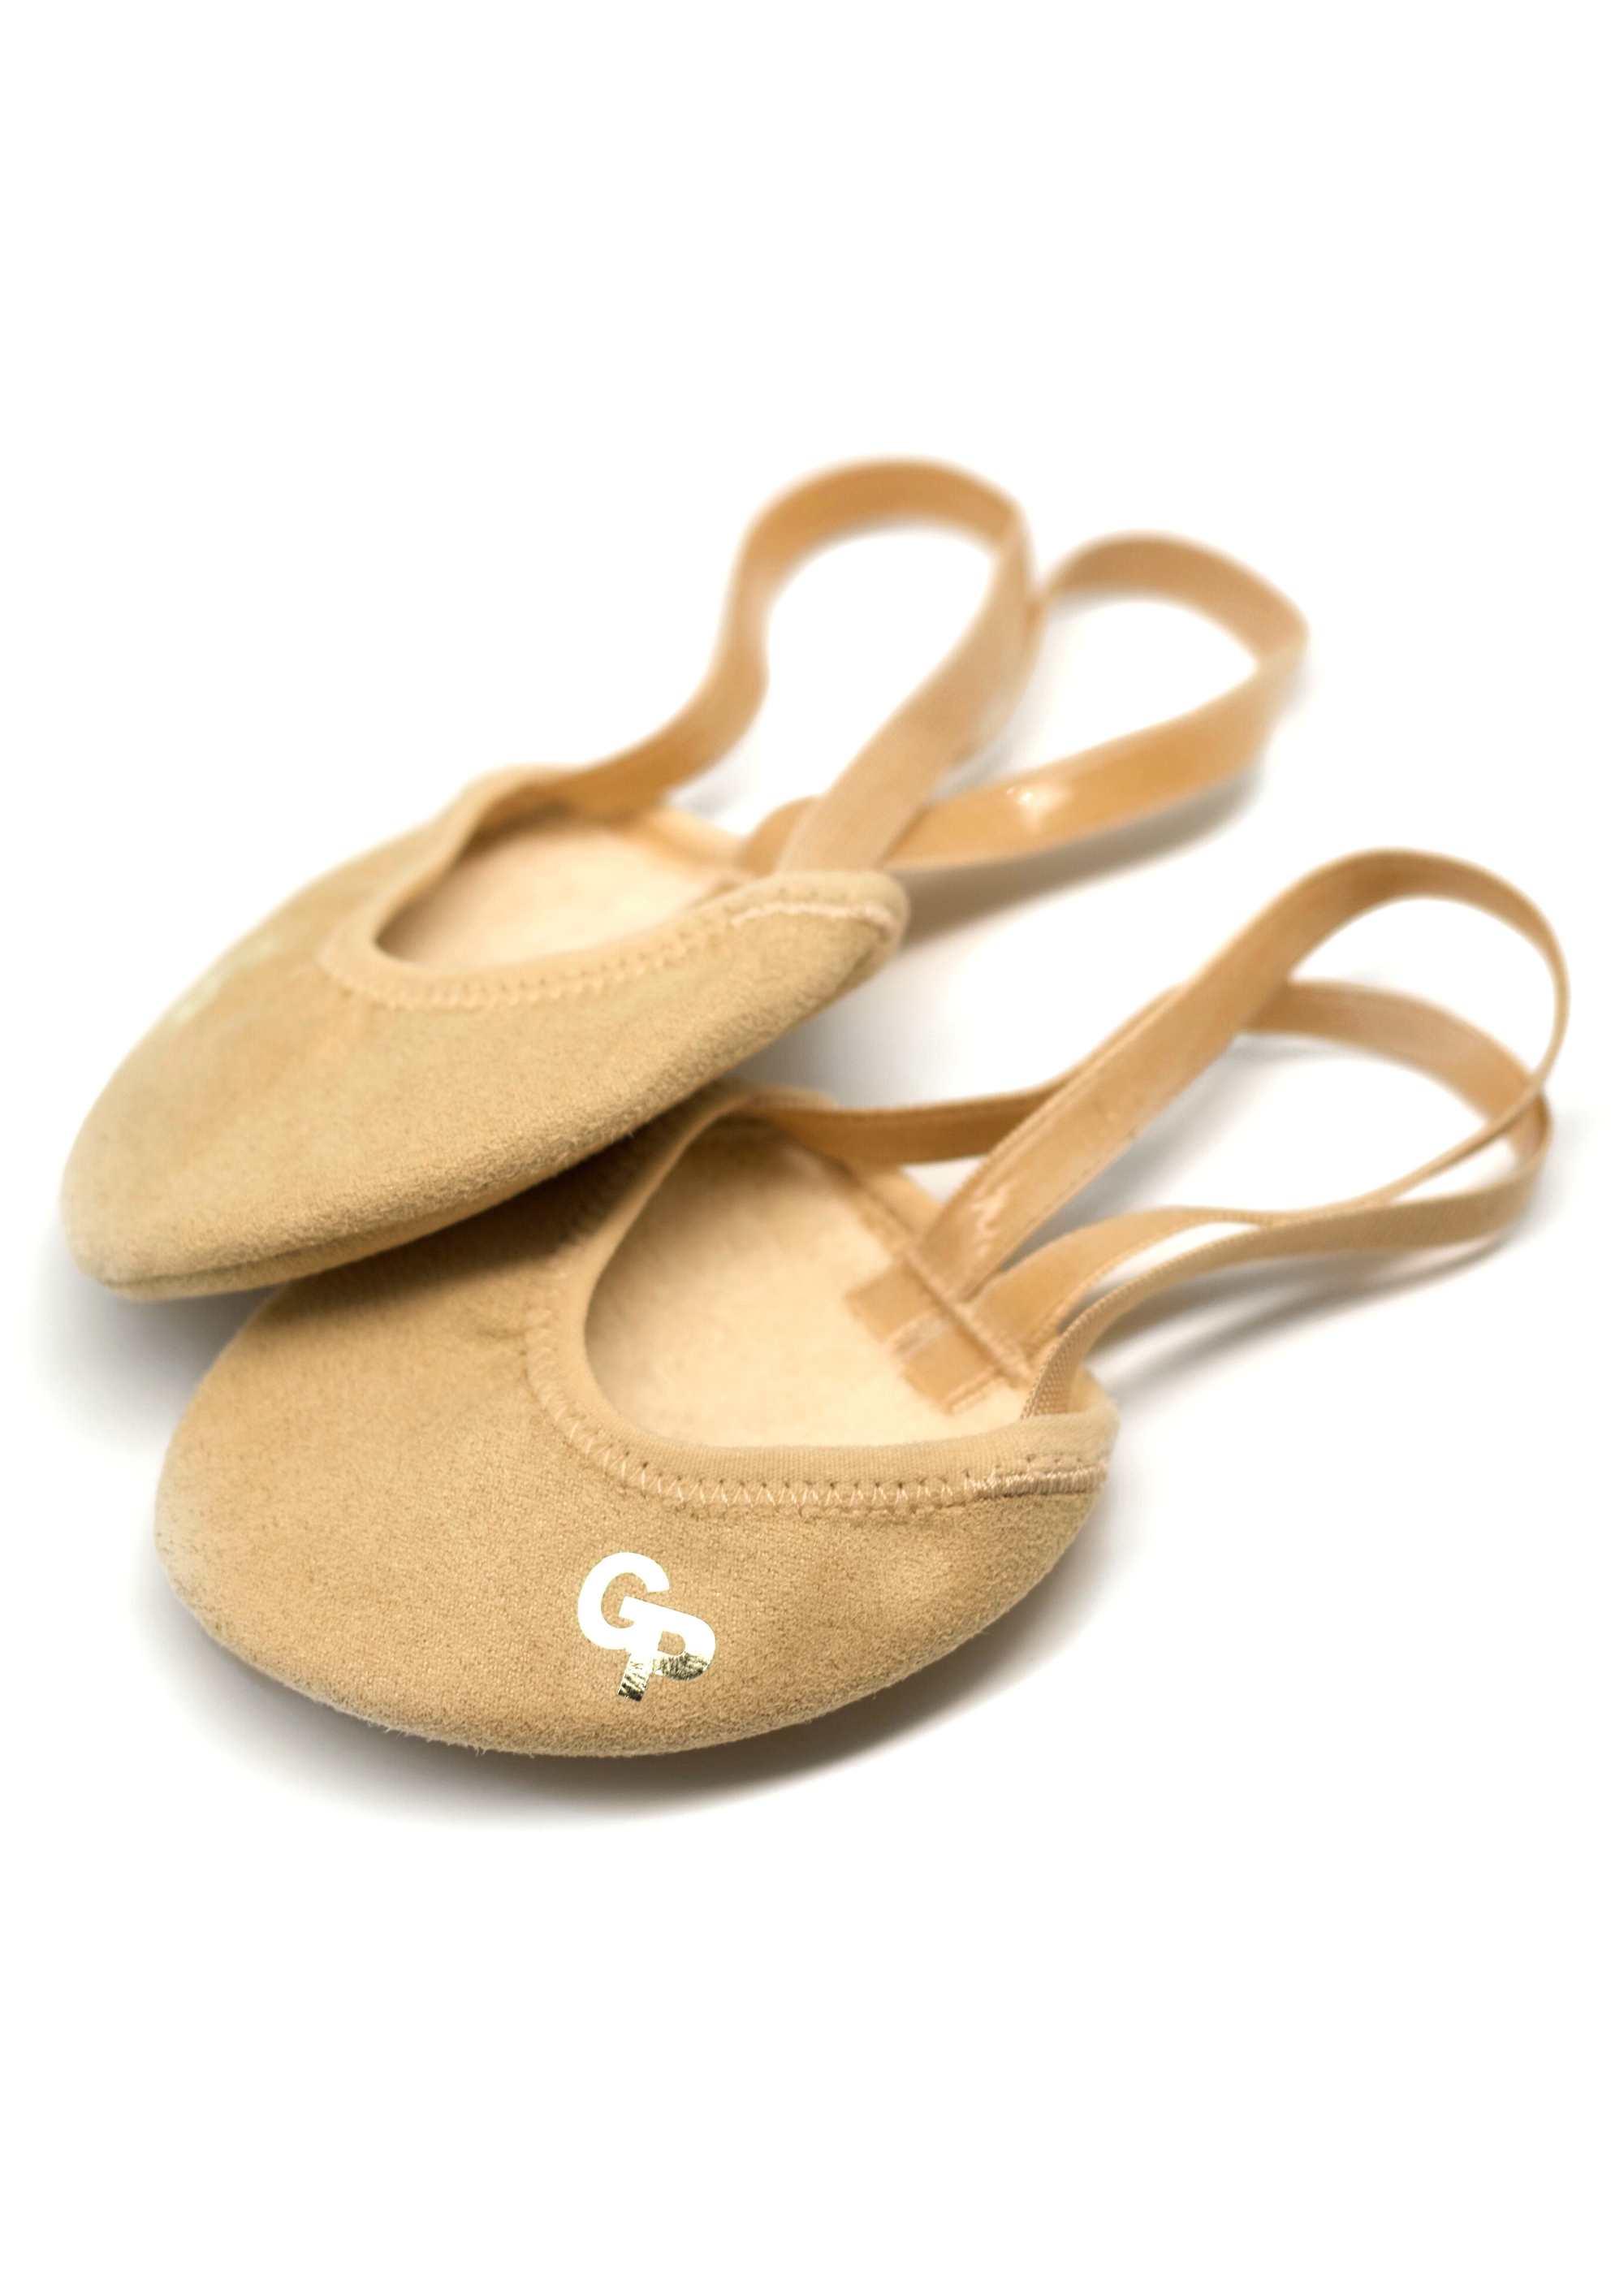 PRACTICE PRO Half Shoes by Grand Prix